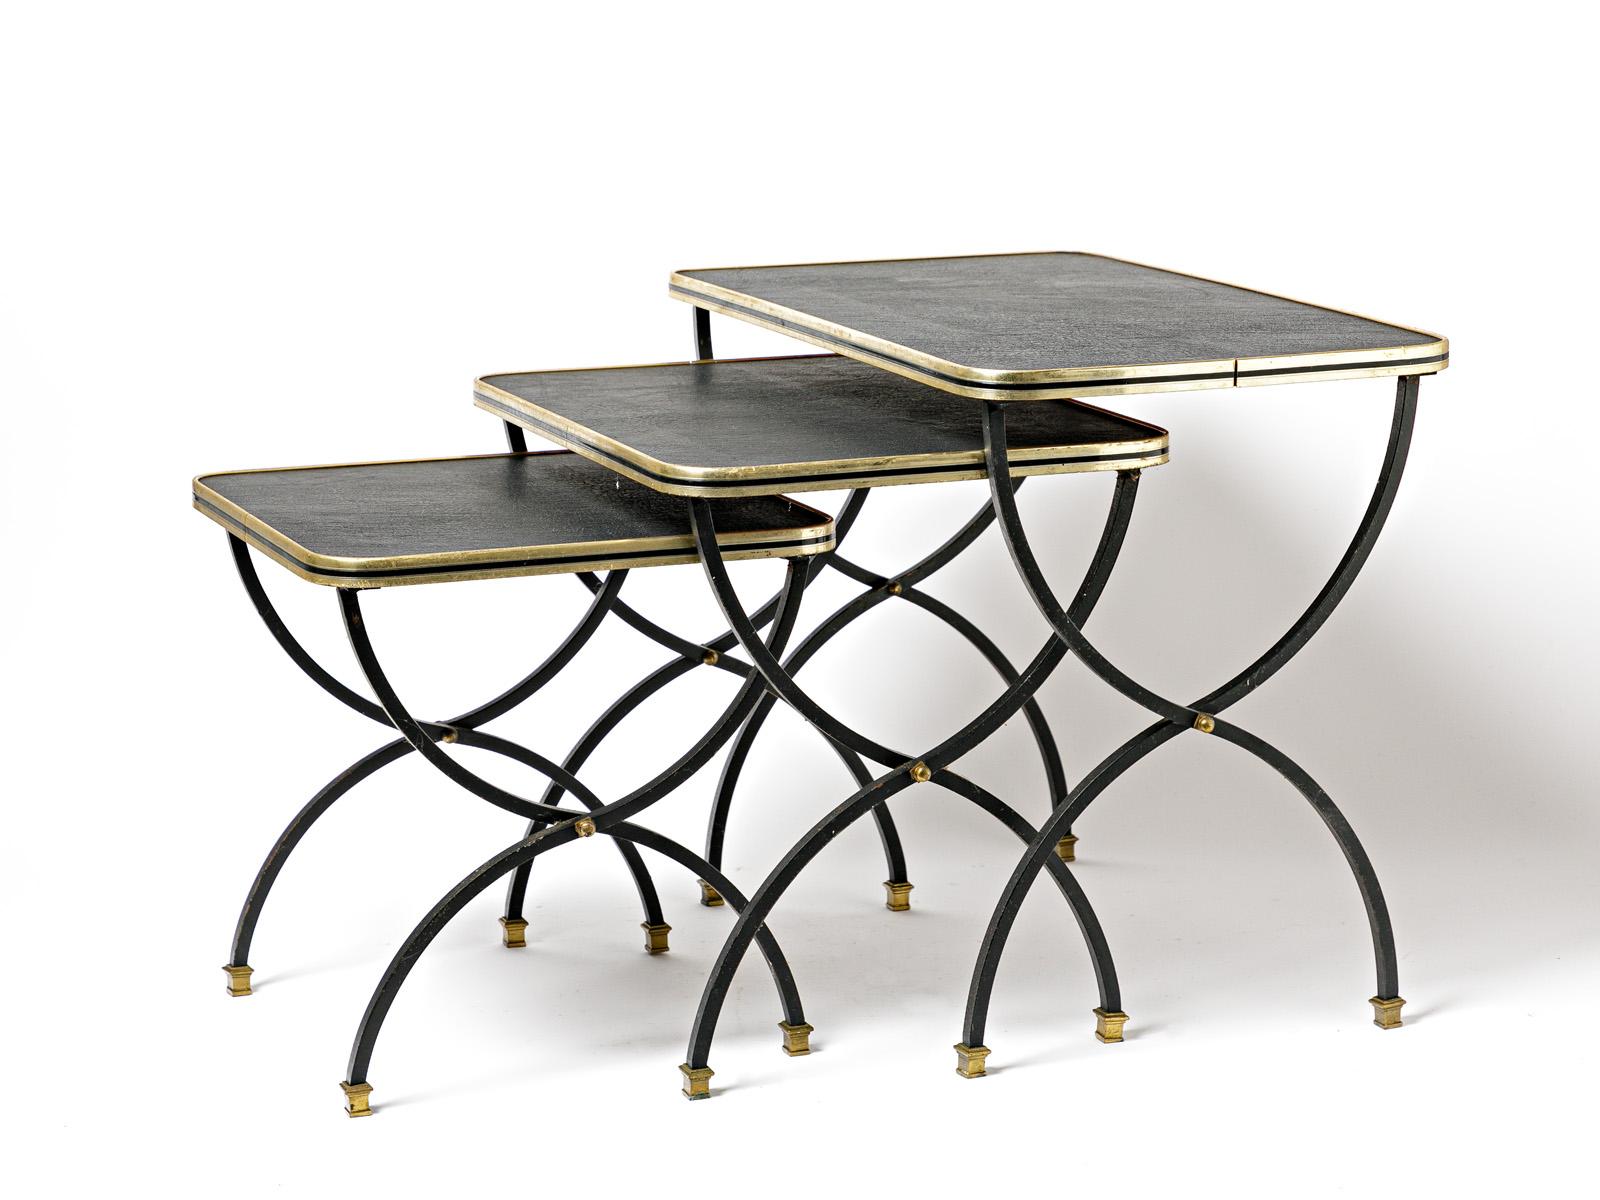 In the style of Jacques Adnet


Original set of 3 low tables in black metal, brass and leatherette

Circa 1960

Original very good condition

Size of the biggest
height 45 cm
Large 53 cm
depth 33 cm
